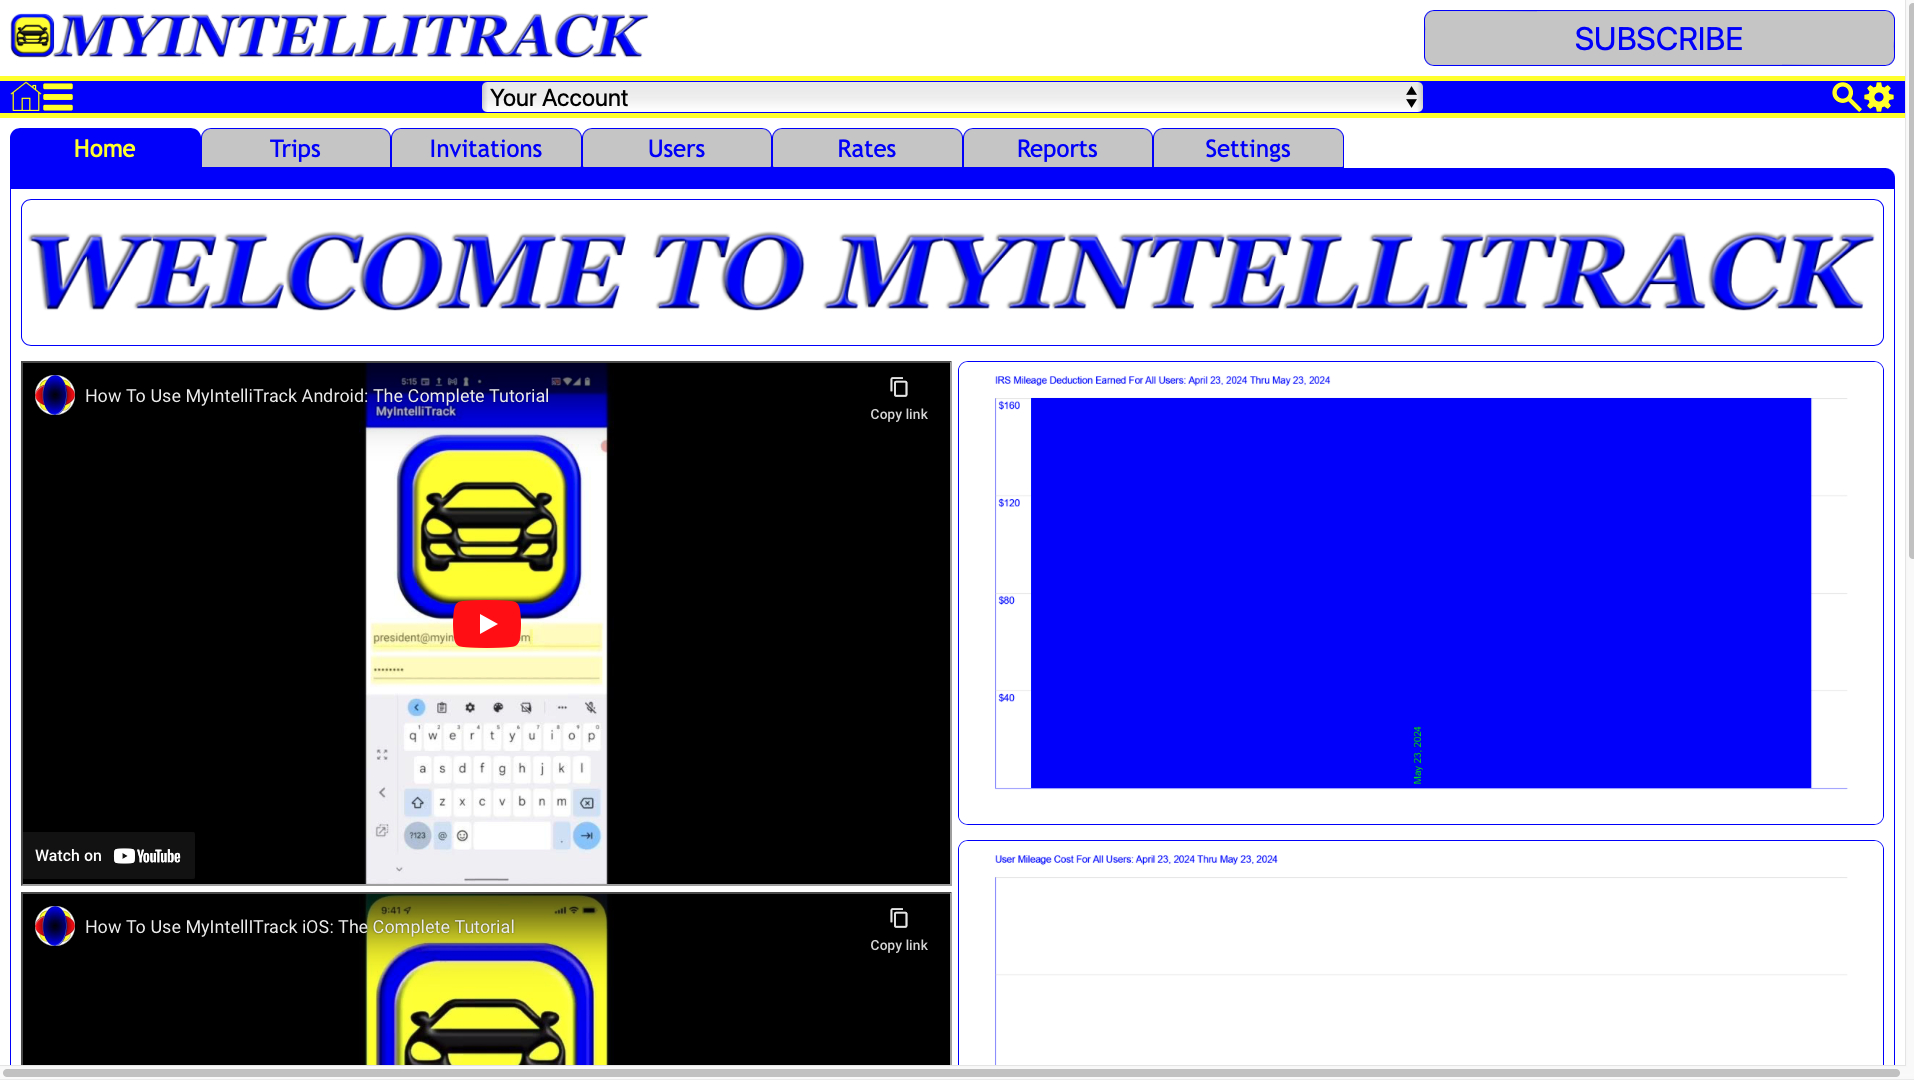 Business And Travel Mileage And Expense Recording Software For Web | MyIntelliTrack™ For Web